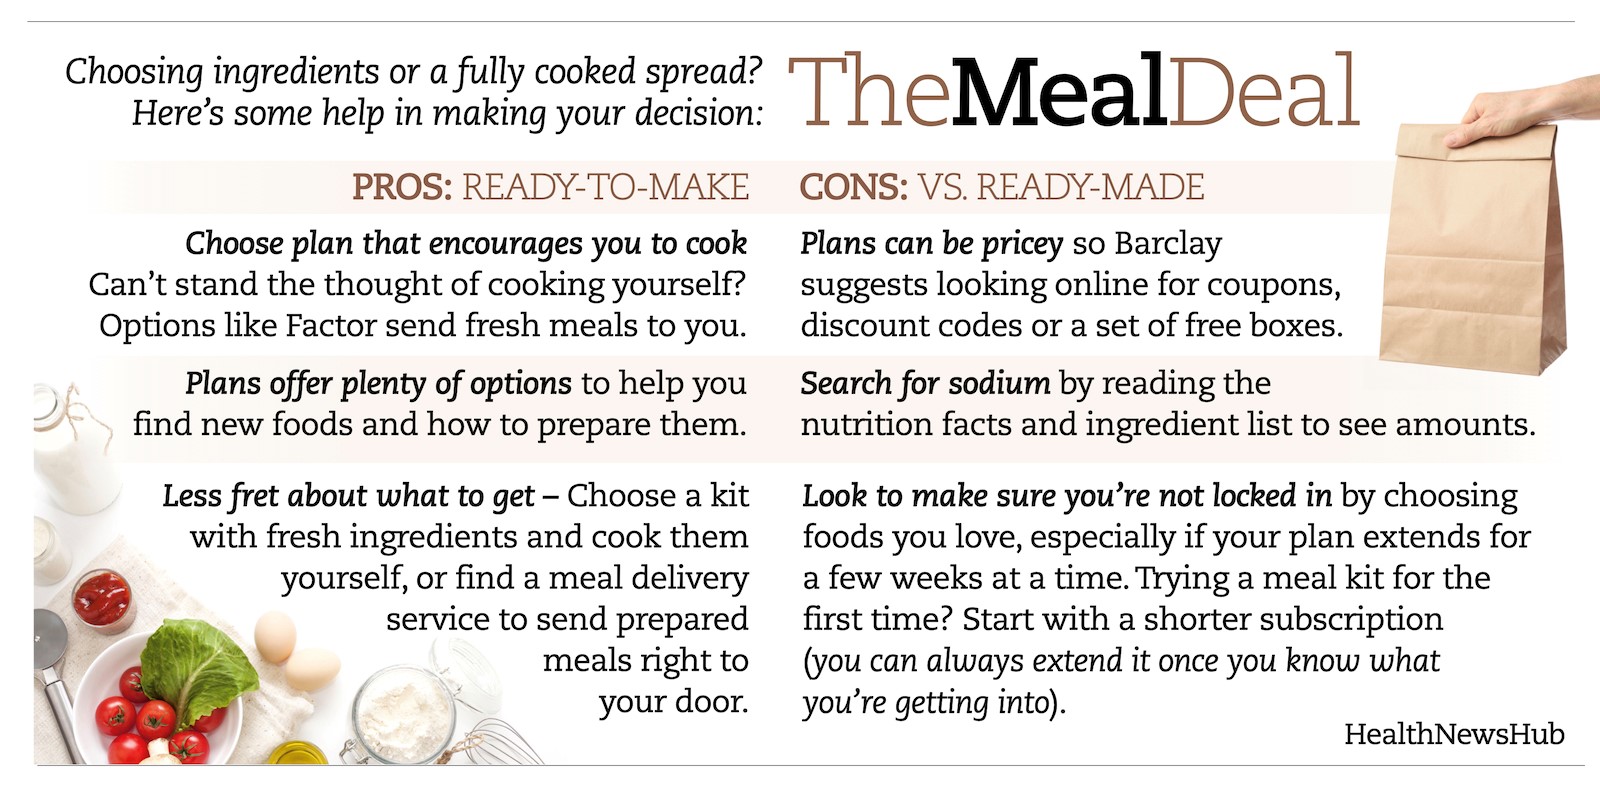 Here are the pros and cons of a meal delivery service.